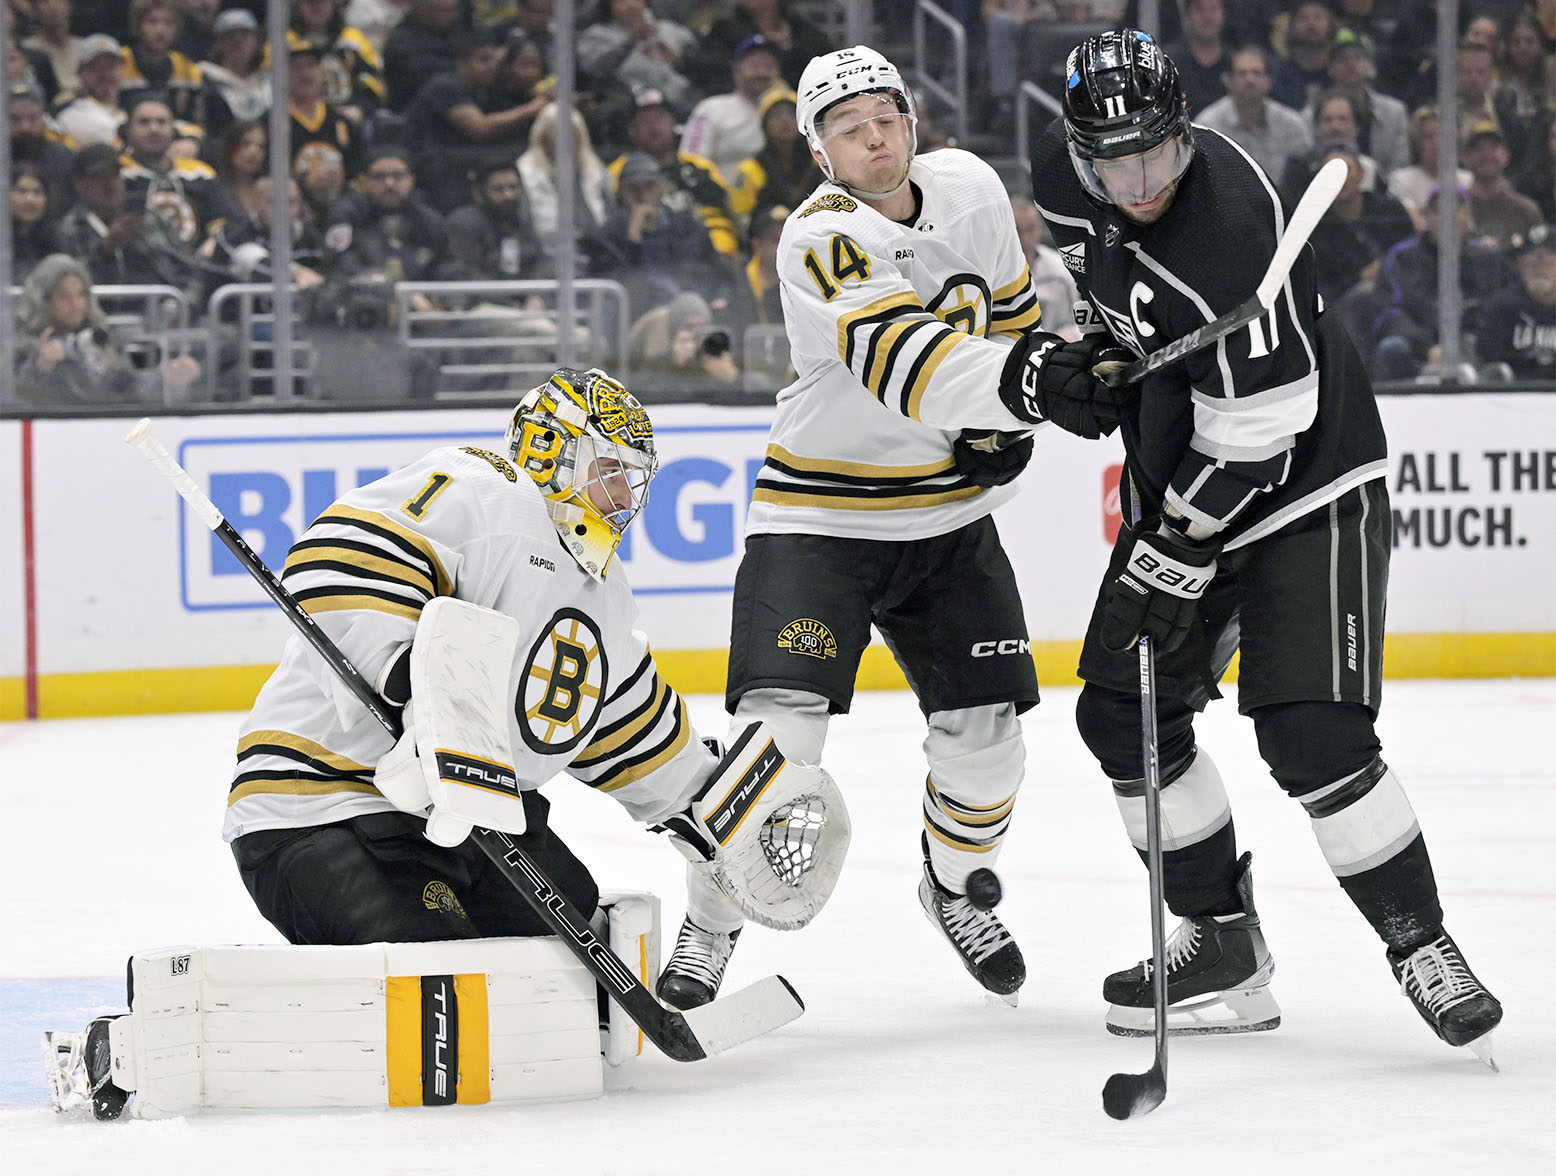 Oct 21, 2023; Los Angeles, California, USA; Boston Bruins goaltender Jeremy Swayman (1) stops a shot with defenseman Ian Mitchell (14) defending against Los Angeles Kings center Anze Kopitar (11) during the second period at Crypto.com Arena. Mandatory Credit: Alex Gallardo-USA TODAY Sports